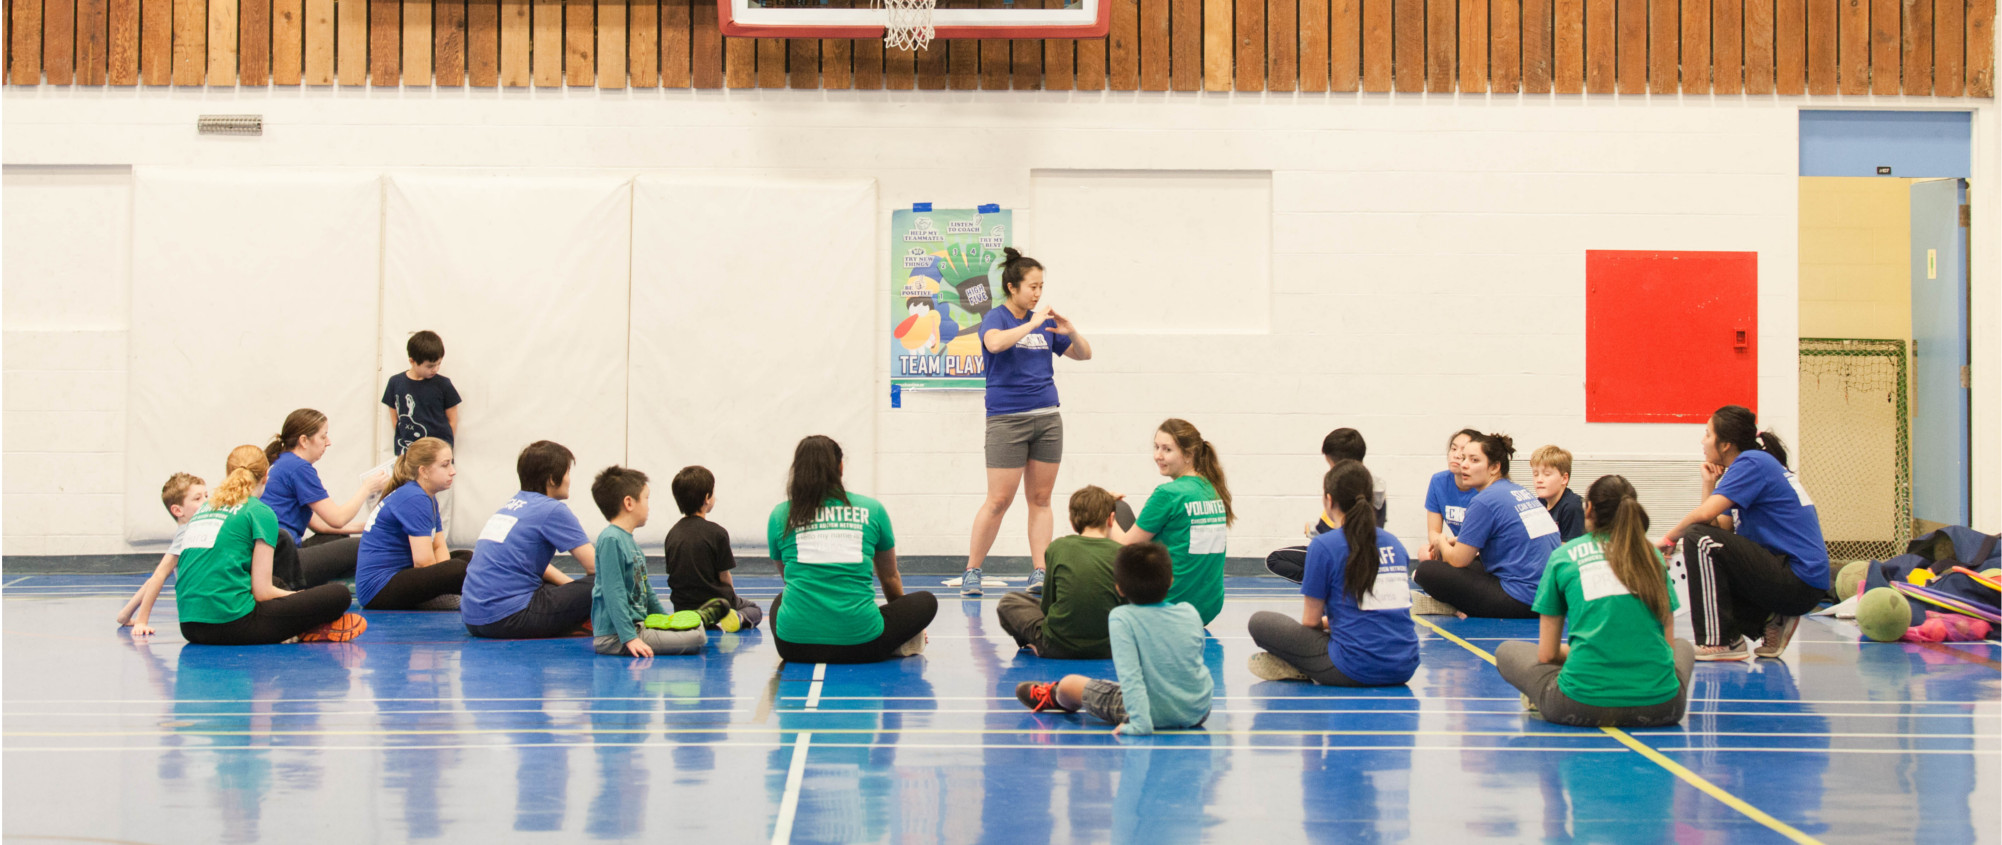 A coach stands in front of seated staff, volunteers and participants within a sports program.